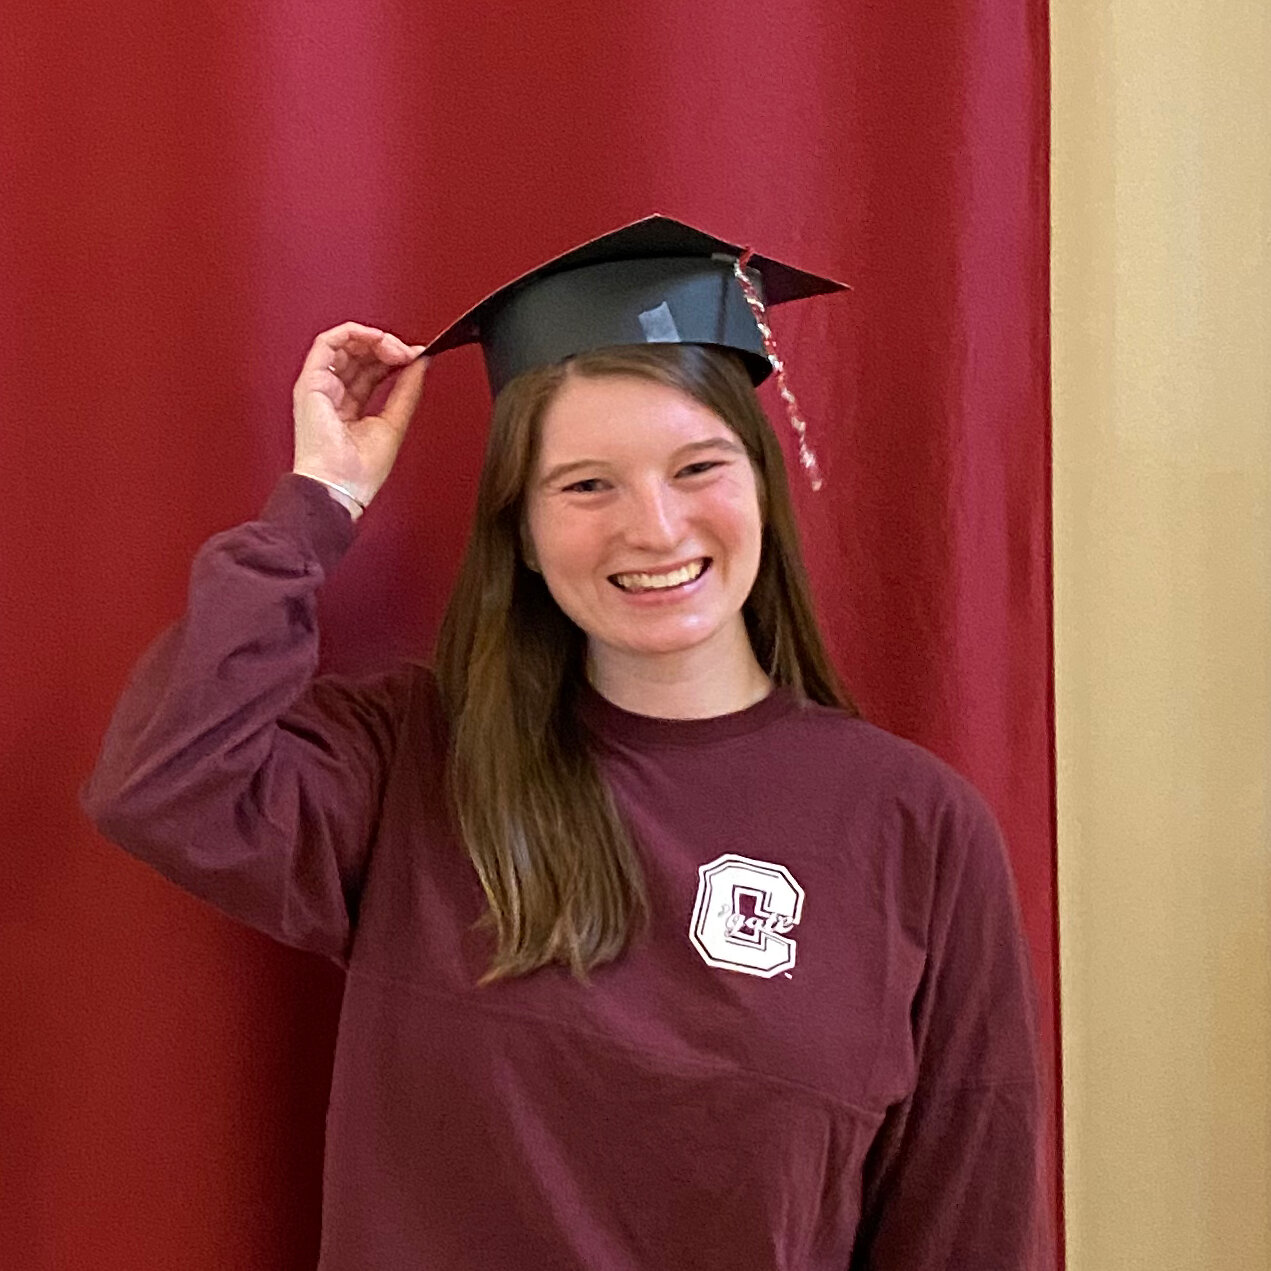 A young woman standing in front of a red backdrop with a homemade graduation cap on her head. Her maroon sweatshirt has the letter “C” on it.